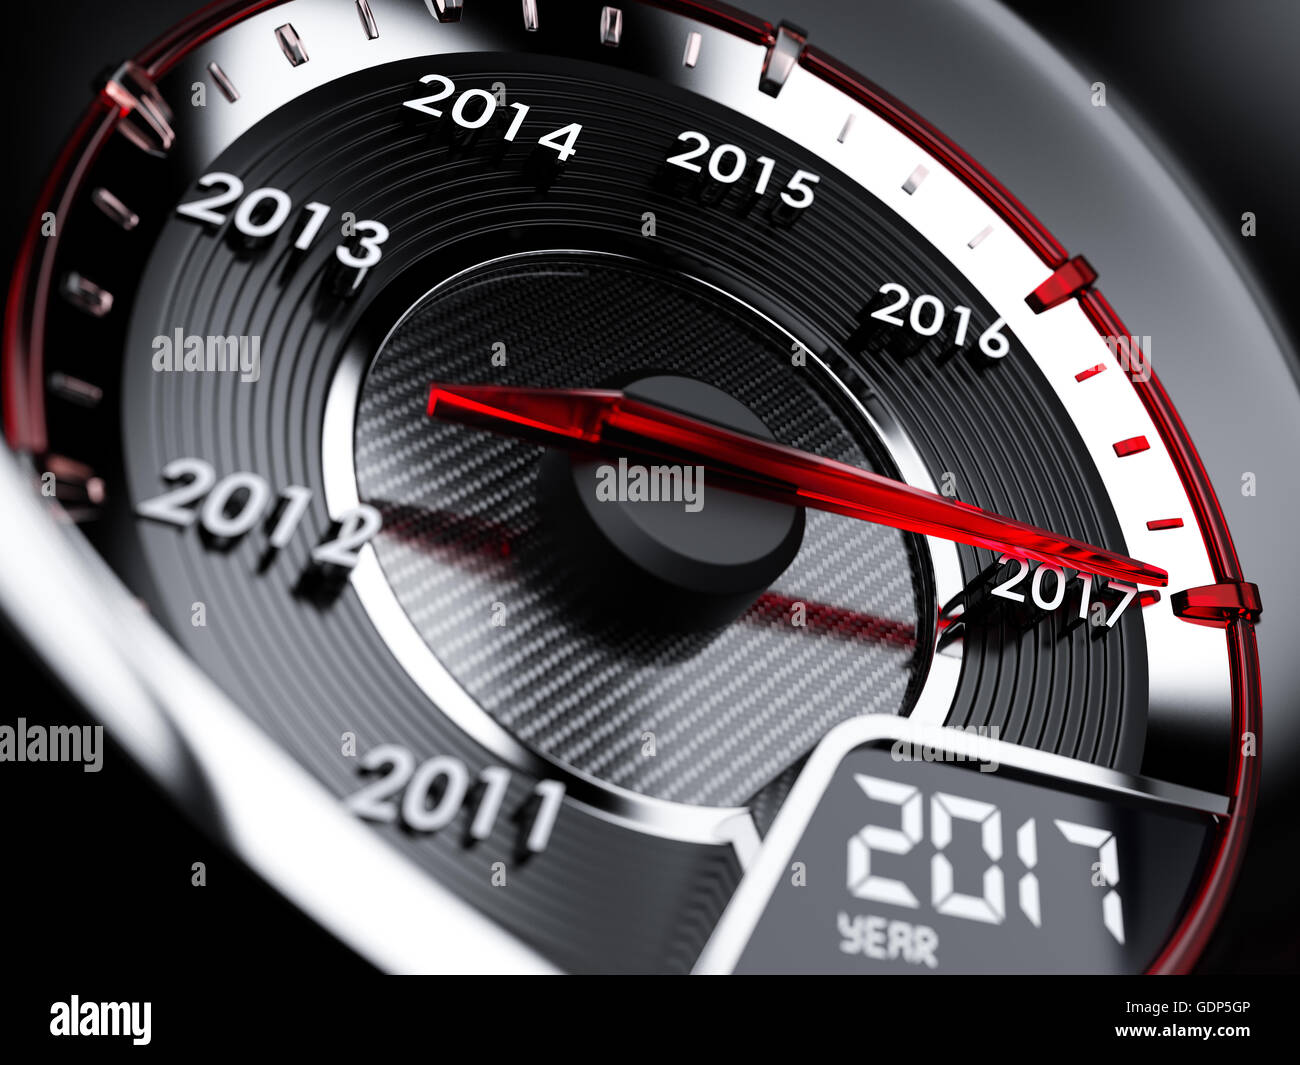 3d illustration of 2017 year car speedometer. Countdown concept Stock Photo